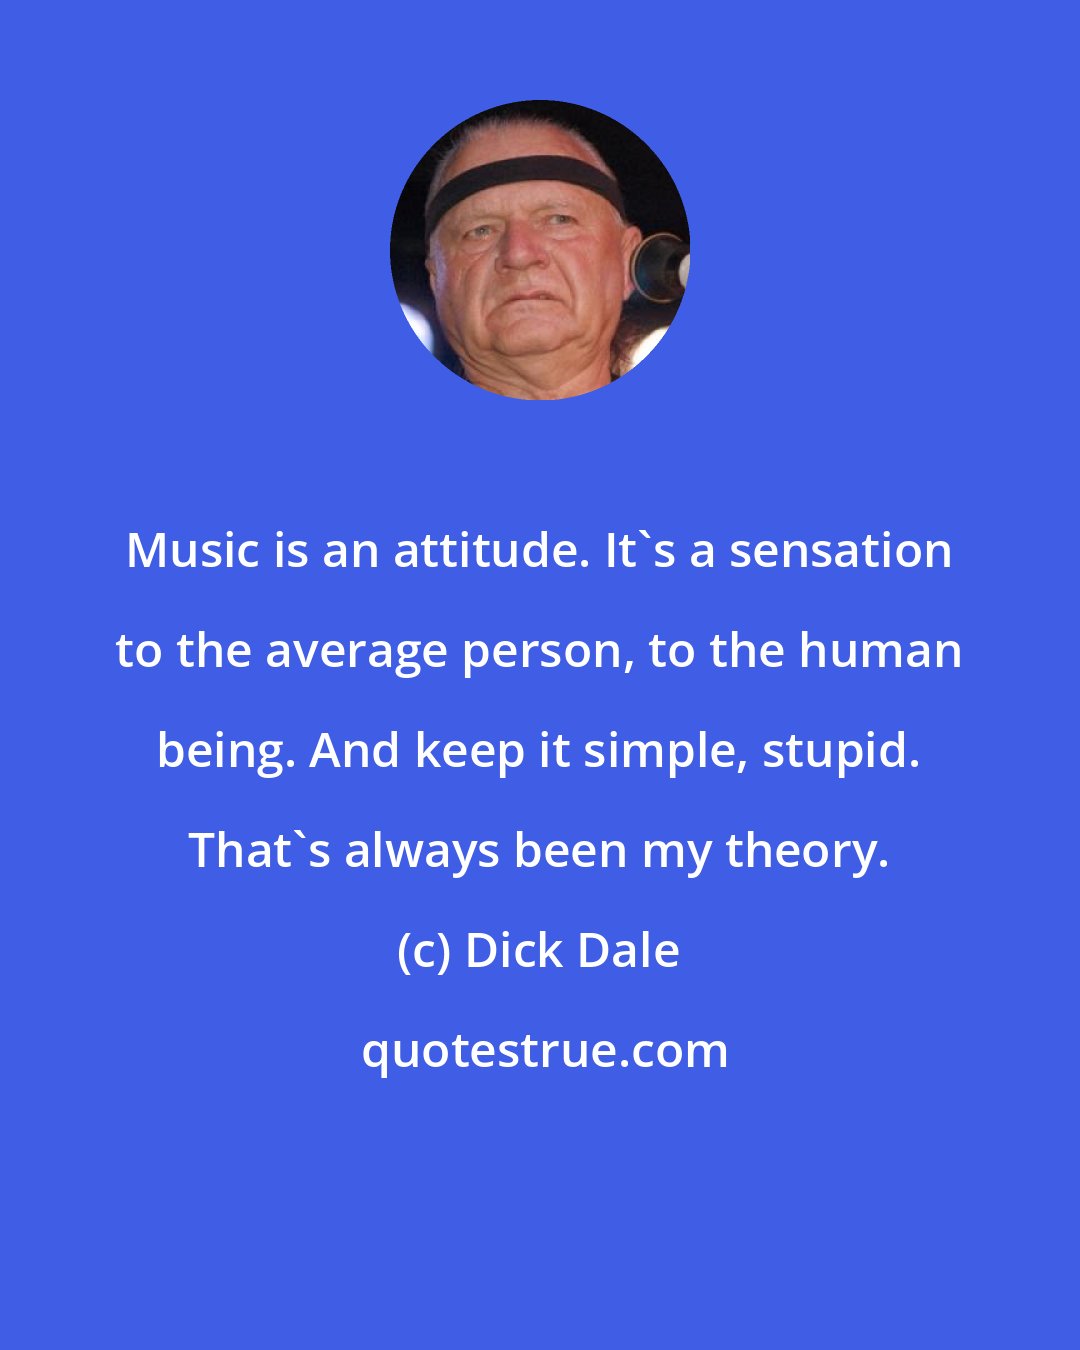 Dick Dale: Music is an attitude. It's a sensation to the average person, to the human being. And keep it simple, stupid. That's always been my theory.